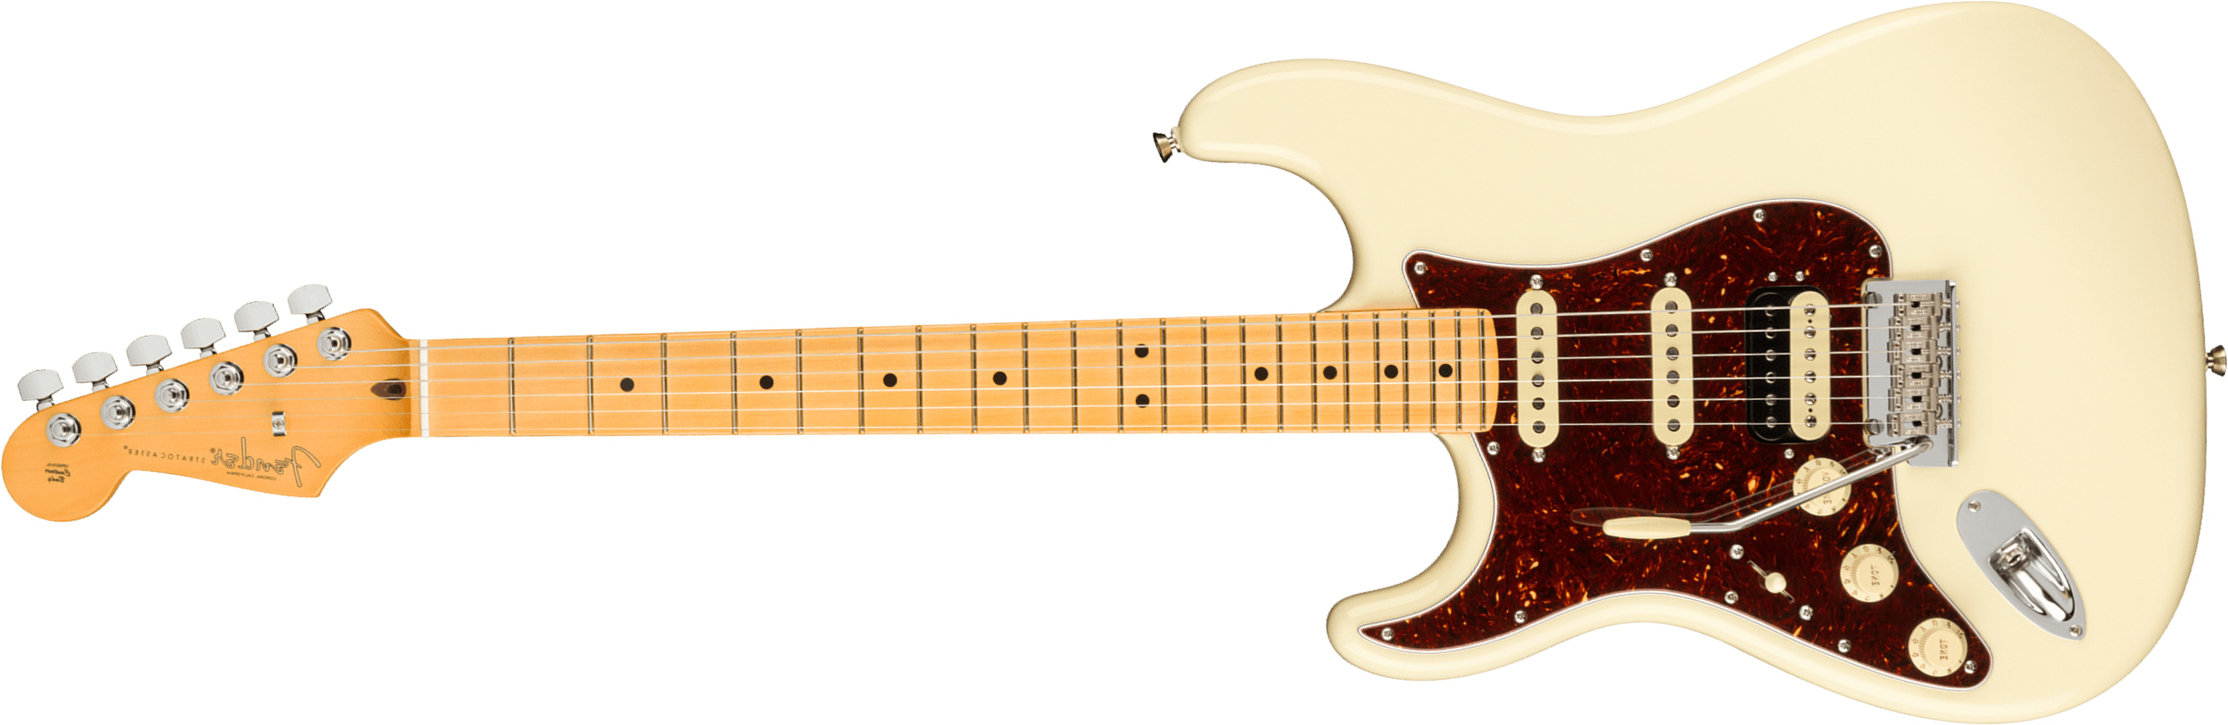 Fender Strat American Professional Ii Lh Gaucher Usa Mn - Olympic White - Left-handed electric guitar - Main picture